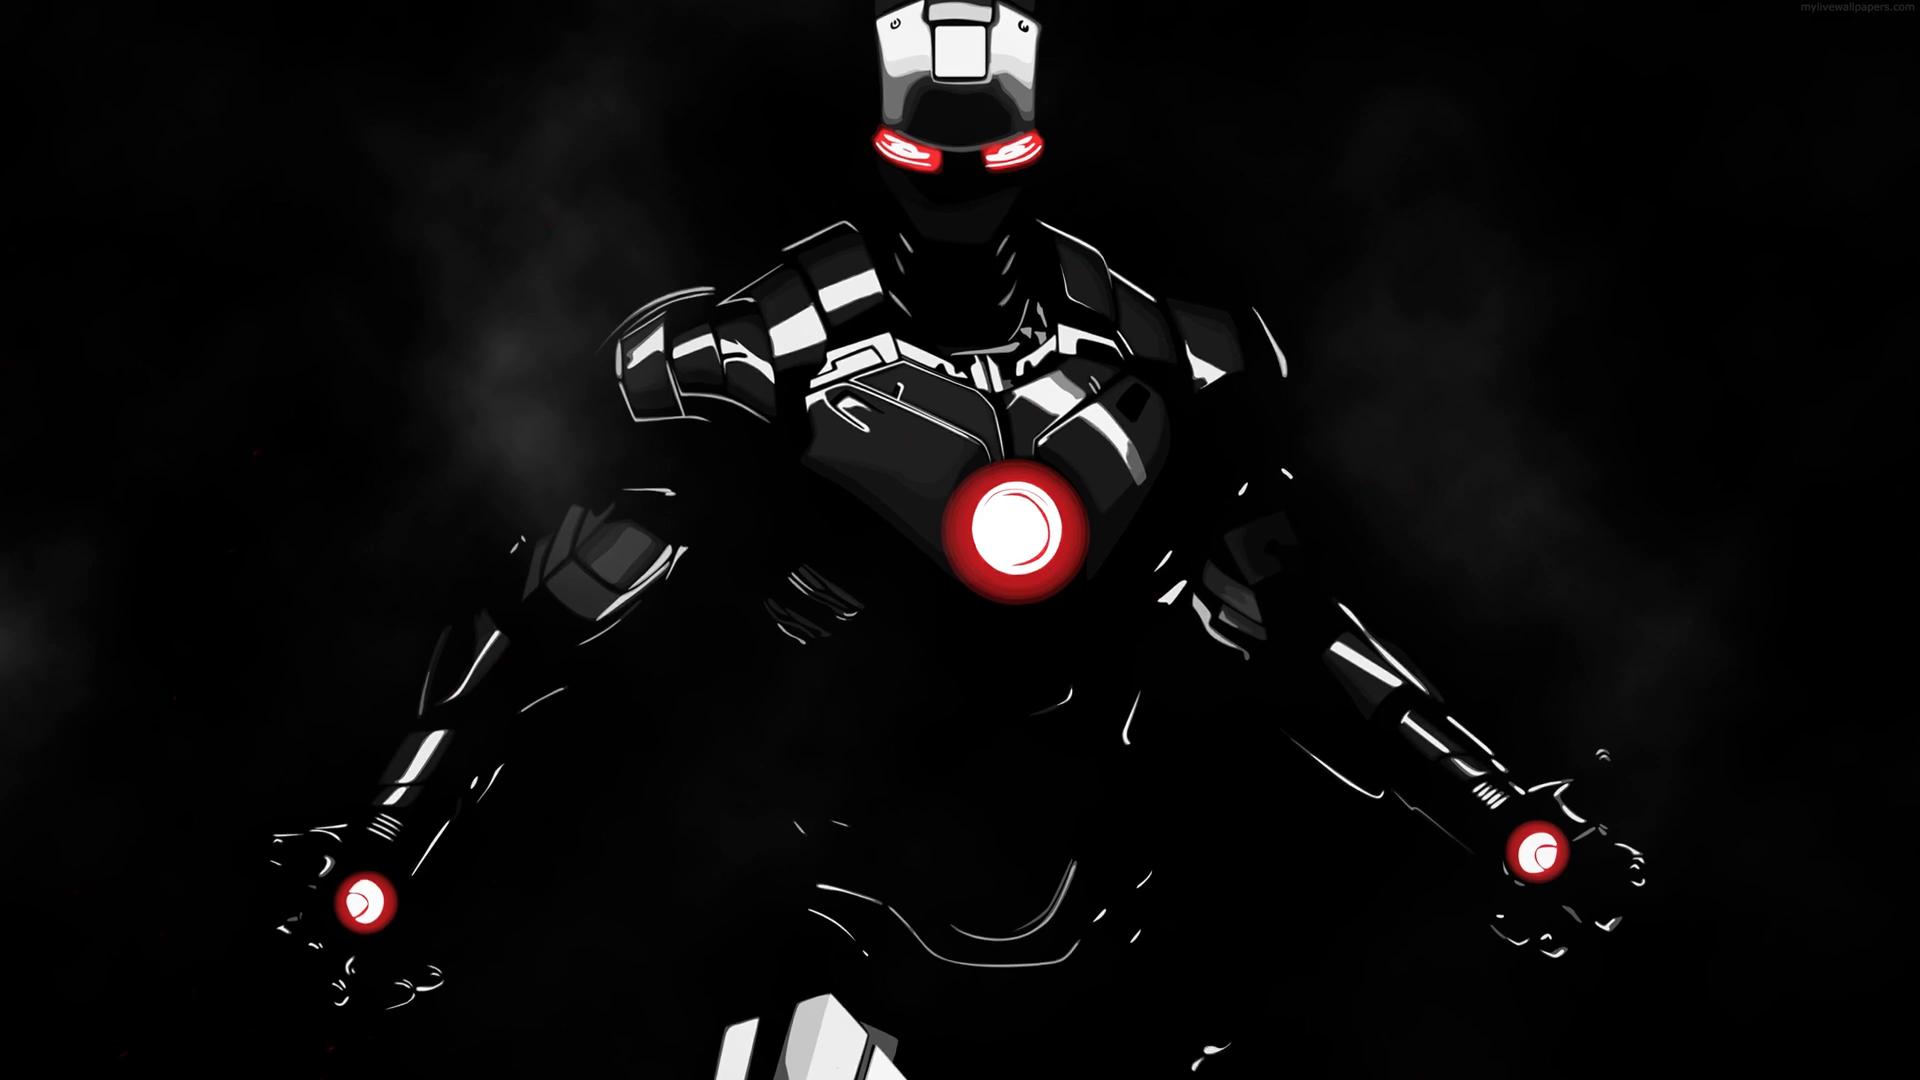 Live Wallpaper: movies, marvel, iron man, arts | 1920x1080 - Rare Gallery  HD Live Wallpapers